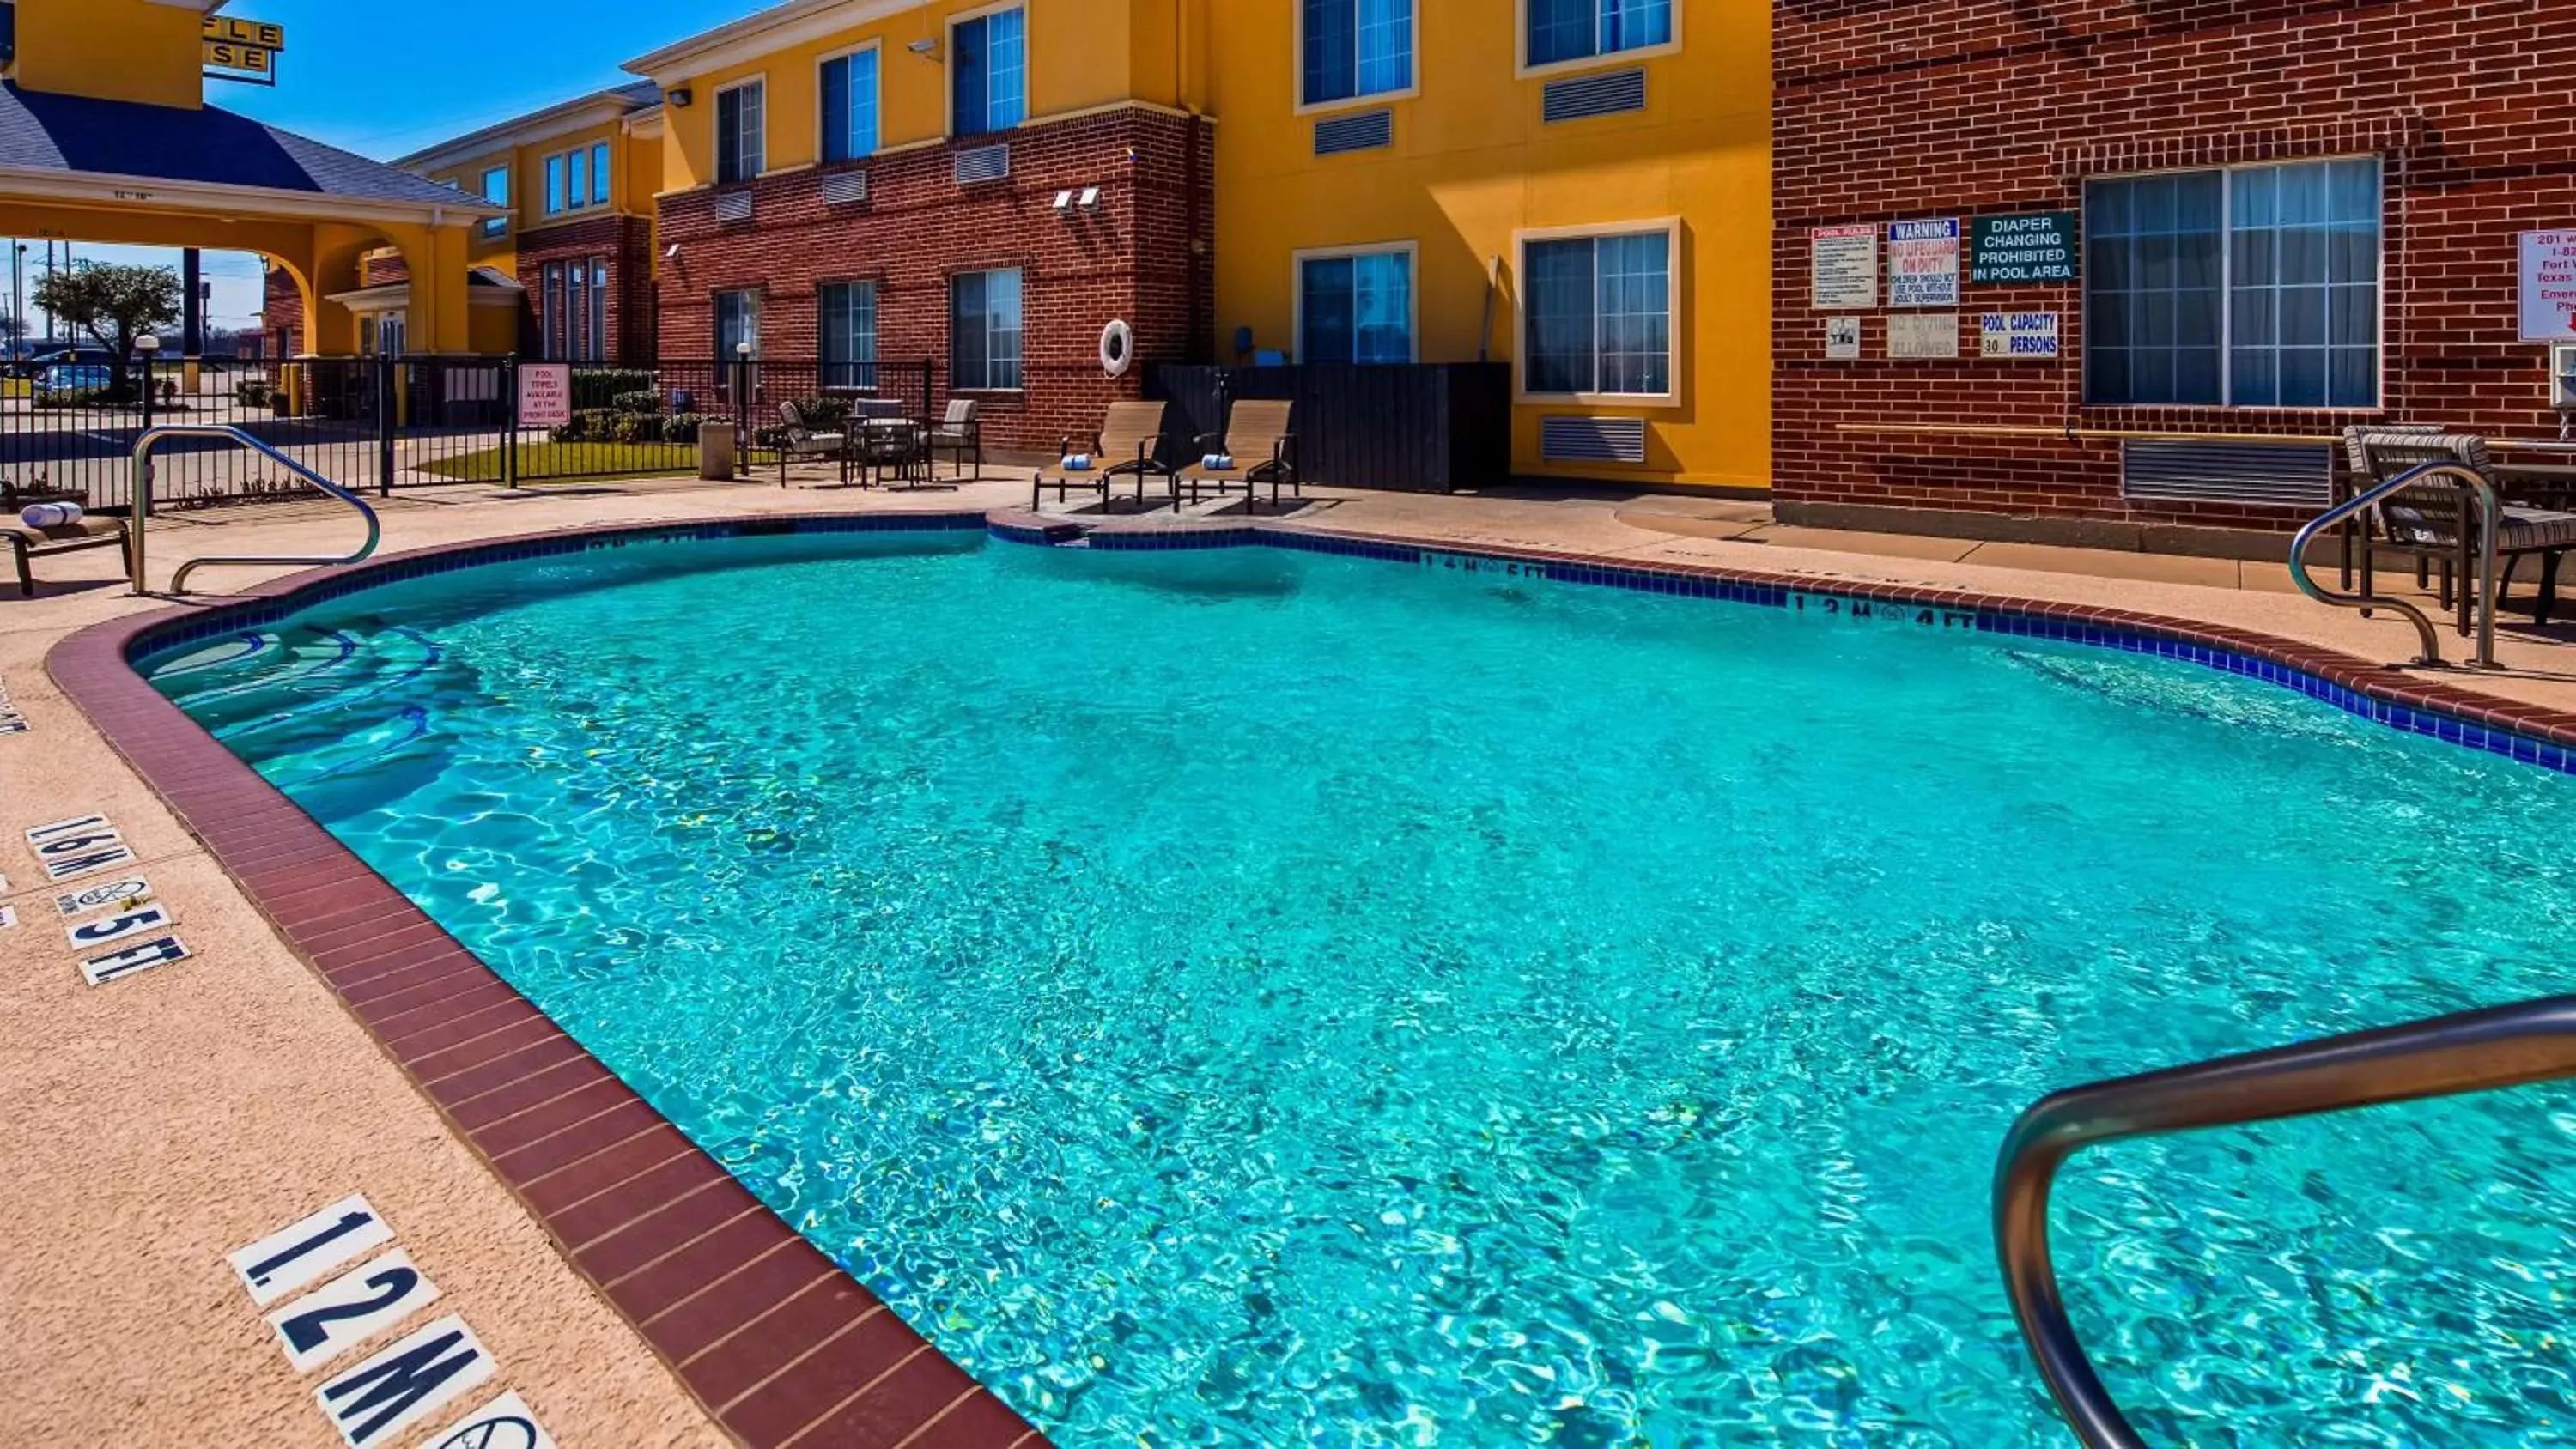 On site, Swimming Pool in Best Western Fort Worth Inn and Suites